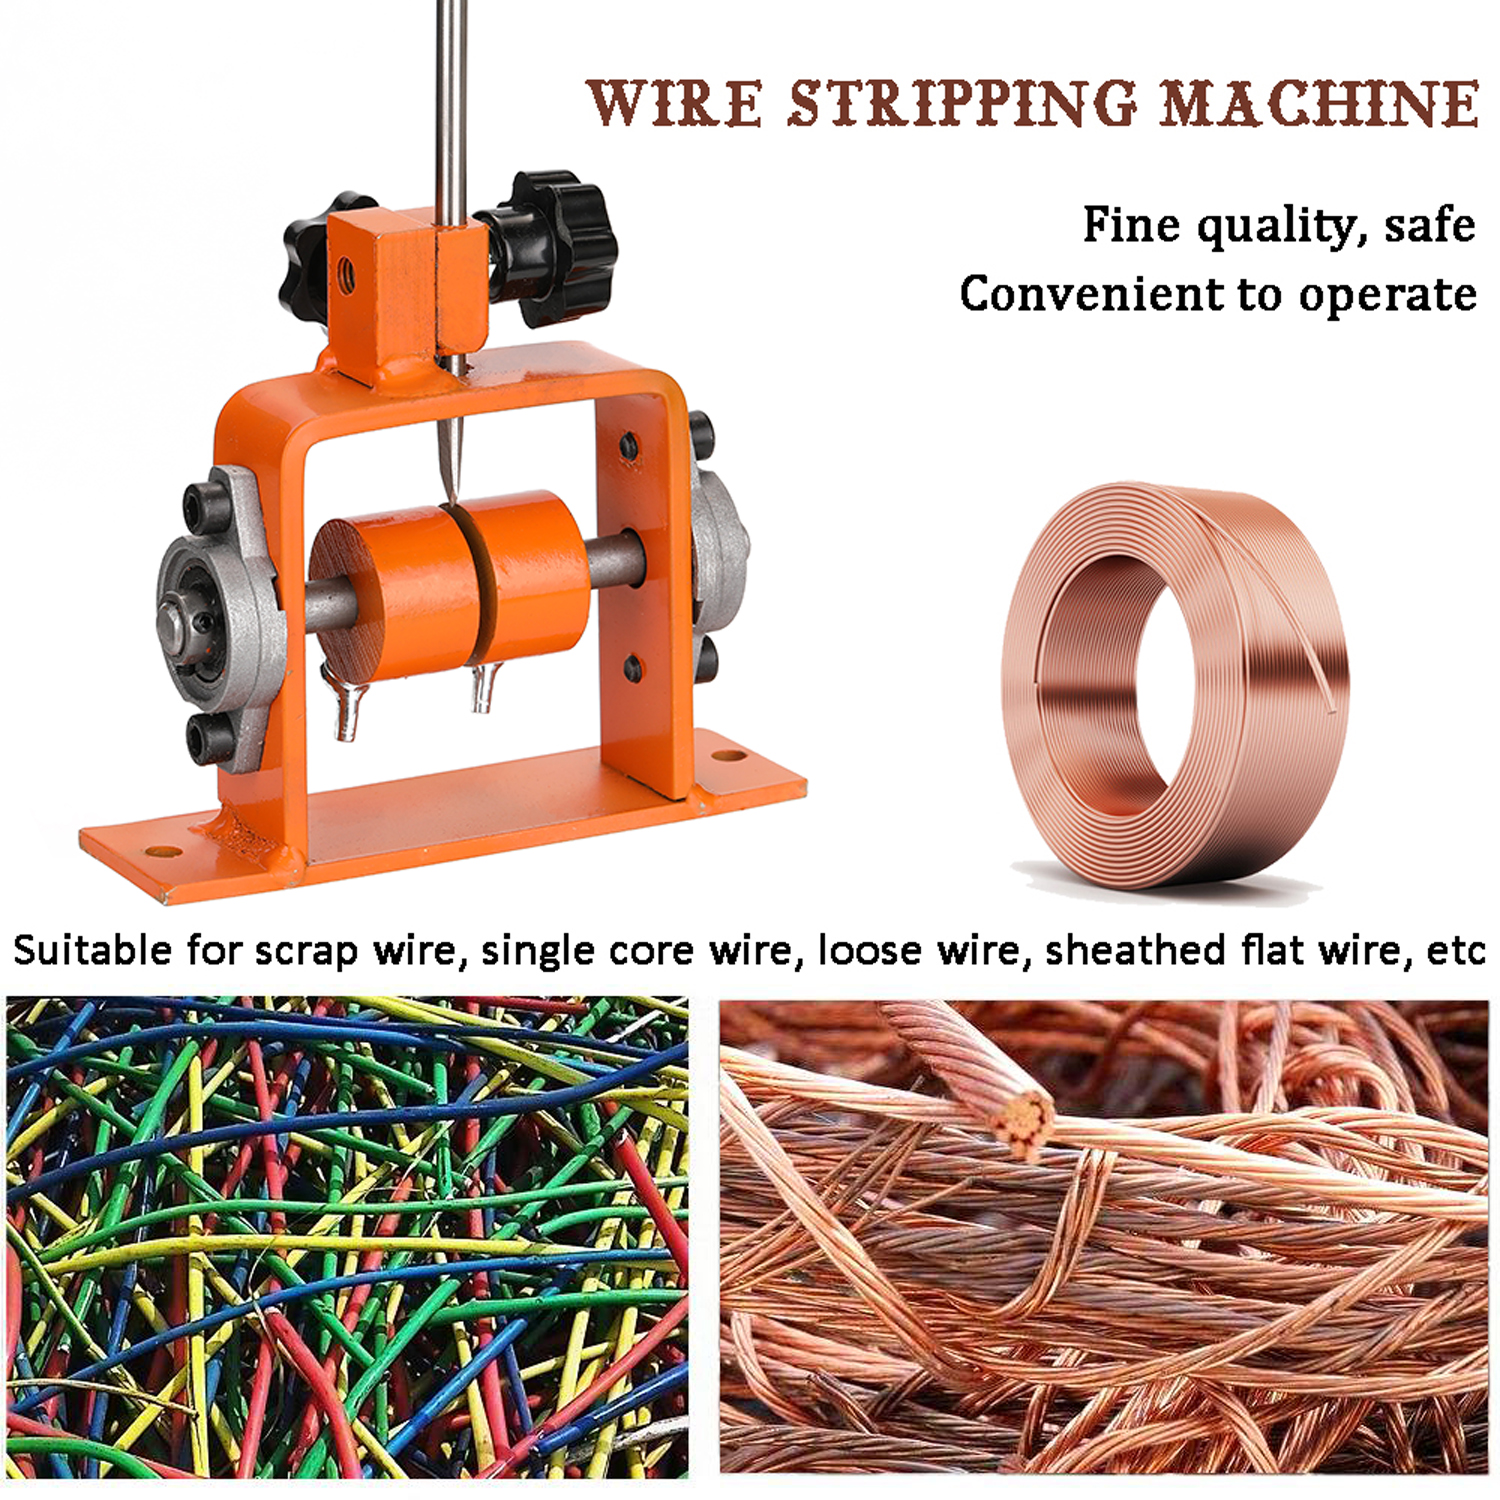 Wire Stripper Manual Peeling Machines Household Scrap Copper Wire and Cable Stripper 1-25mm Hand Tool Small Manual Stripper